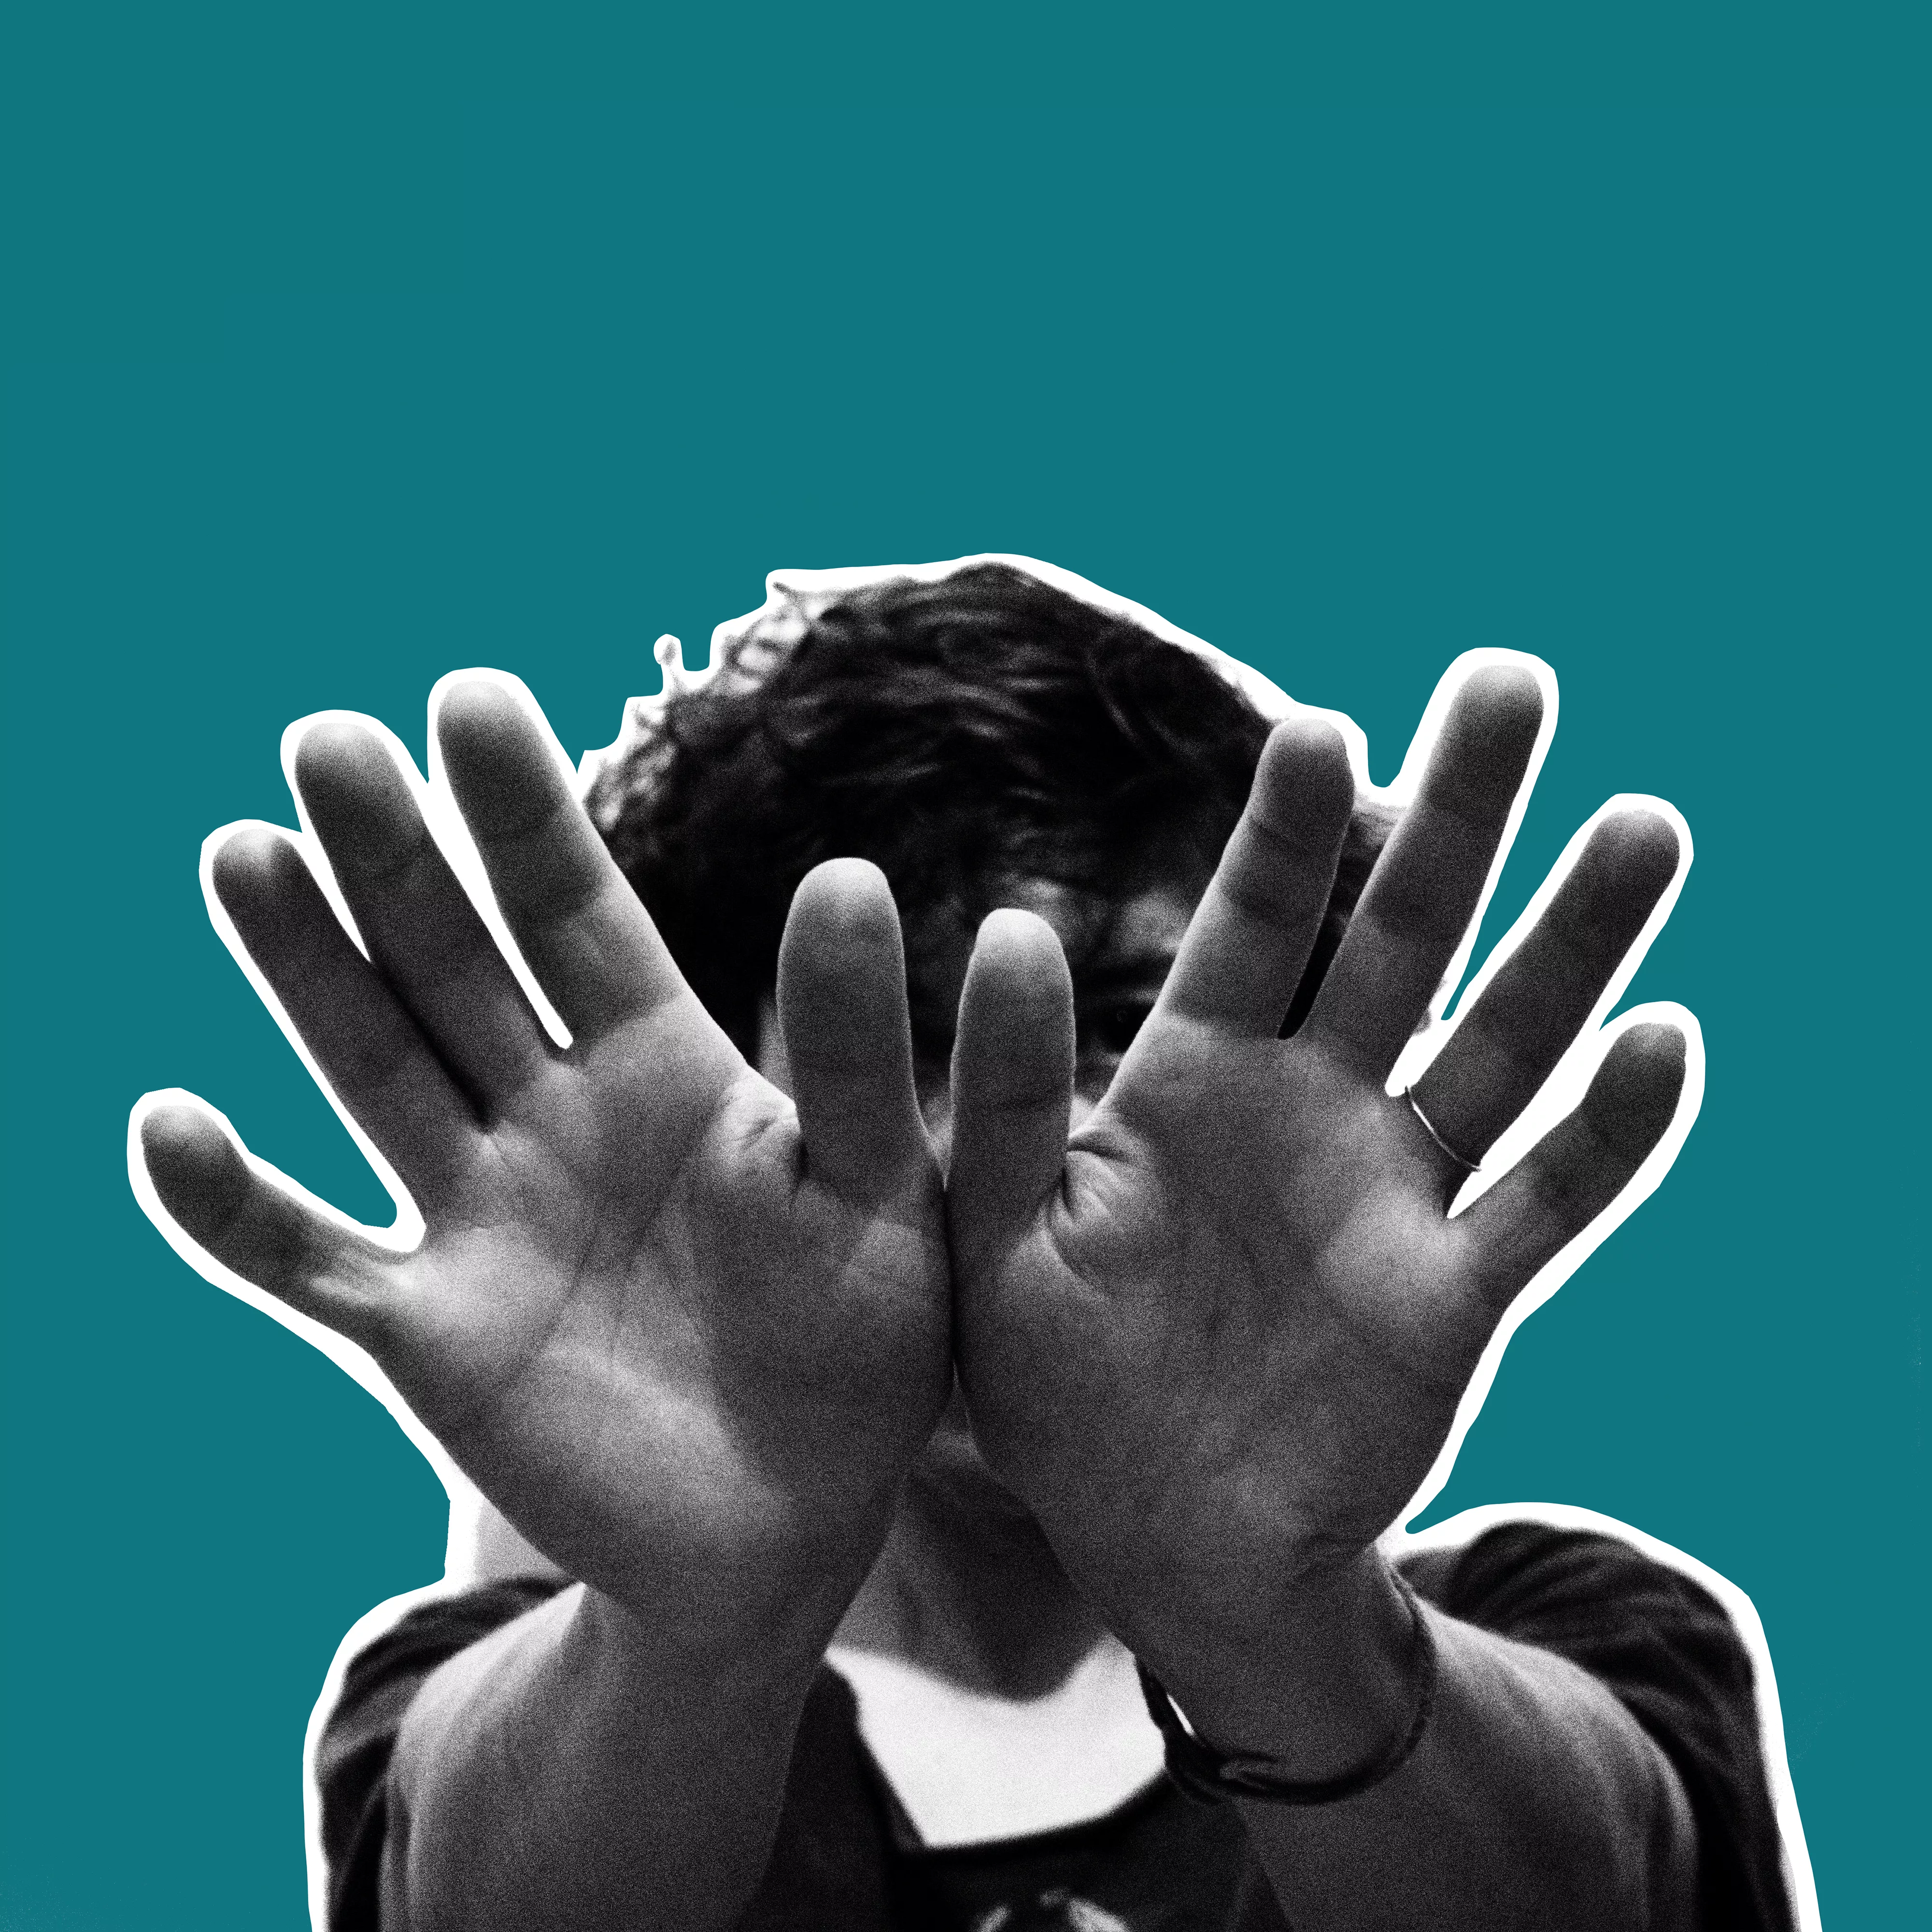 I Can Feel You Creep Into My Private Life - Tune-Yards